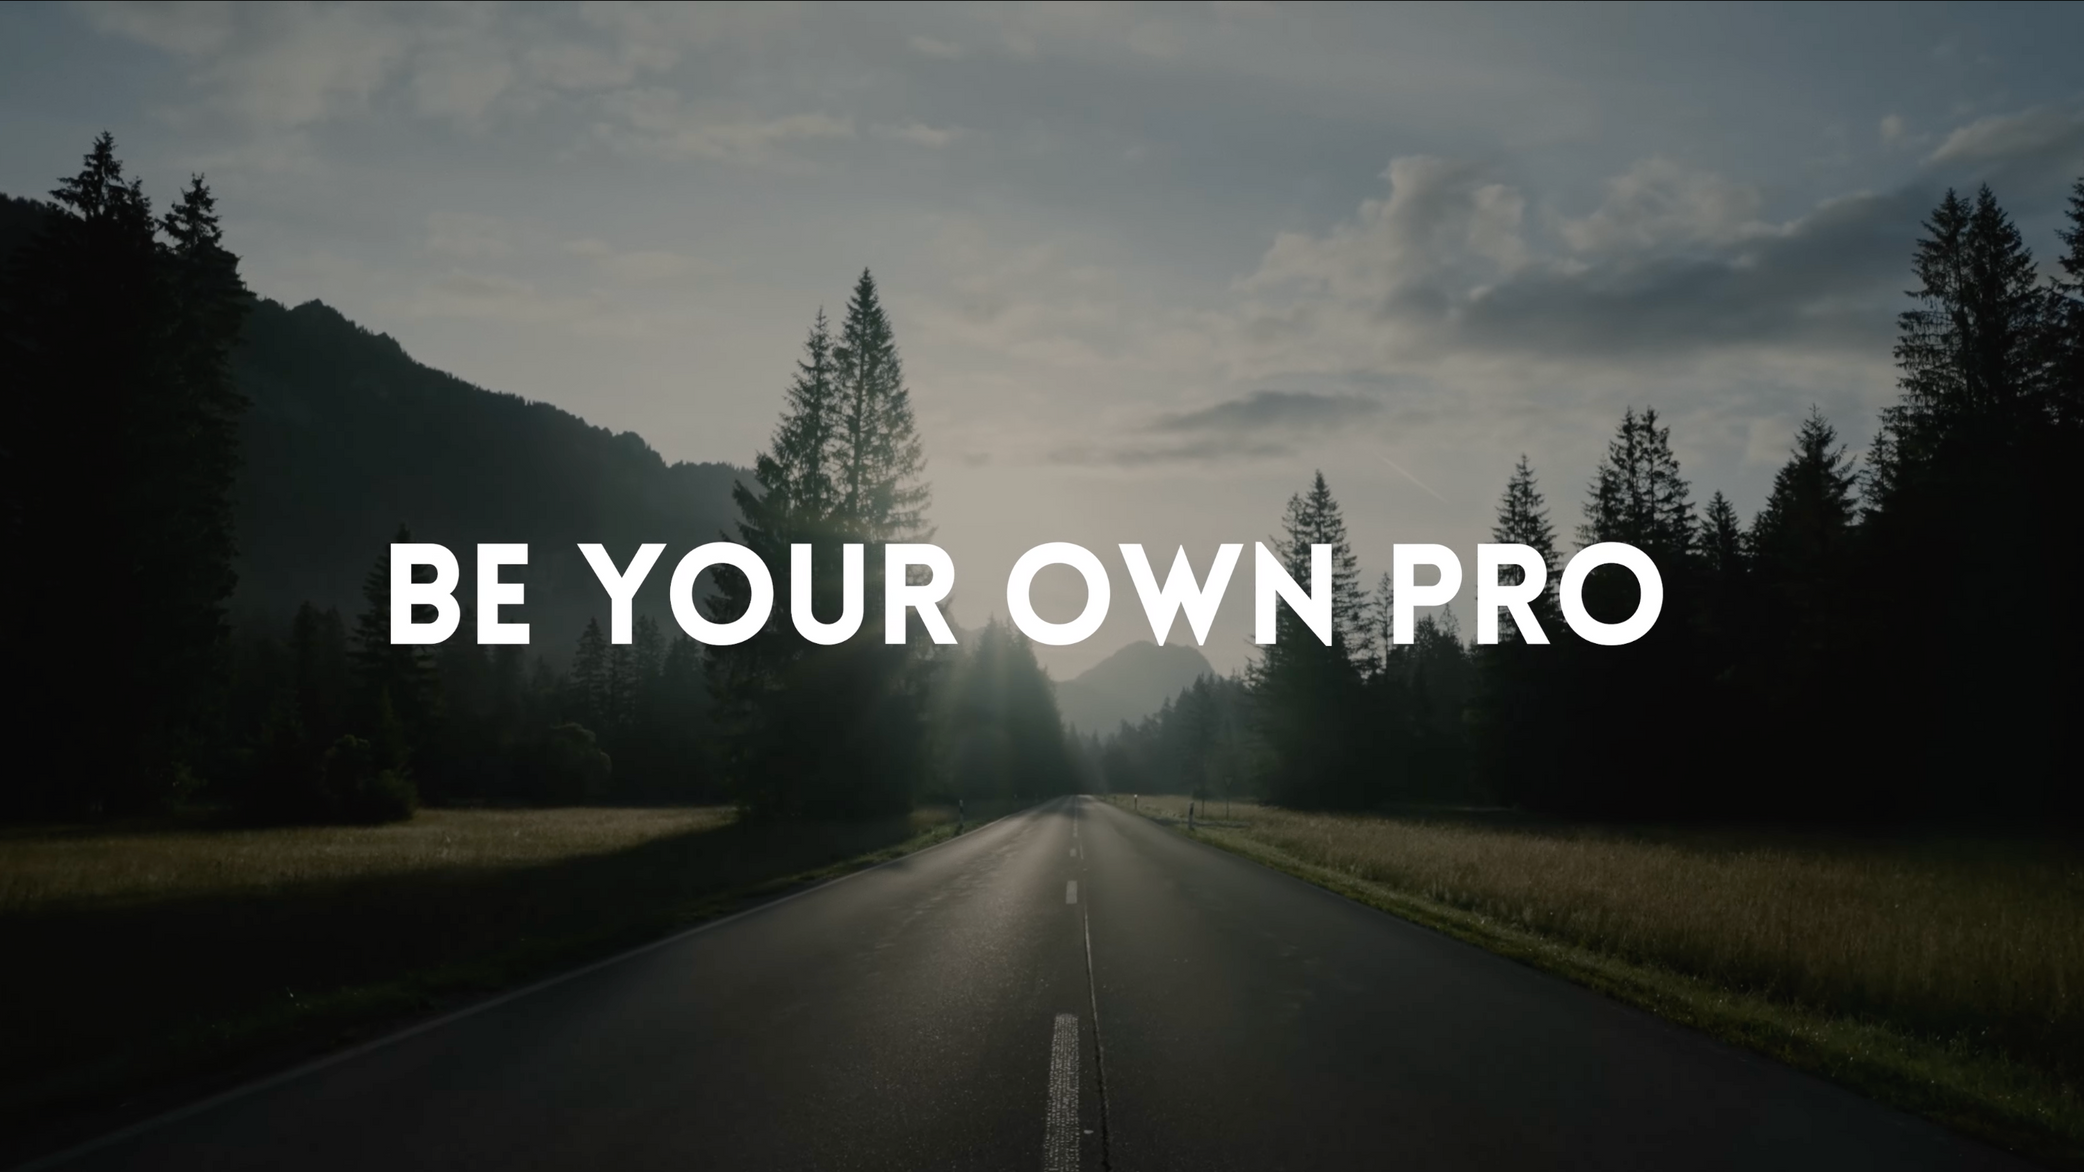 BE YOUR OWN PRO